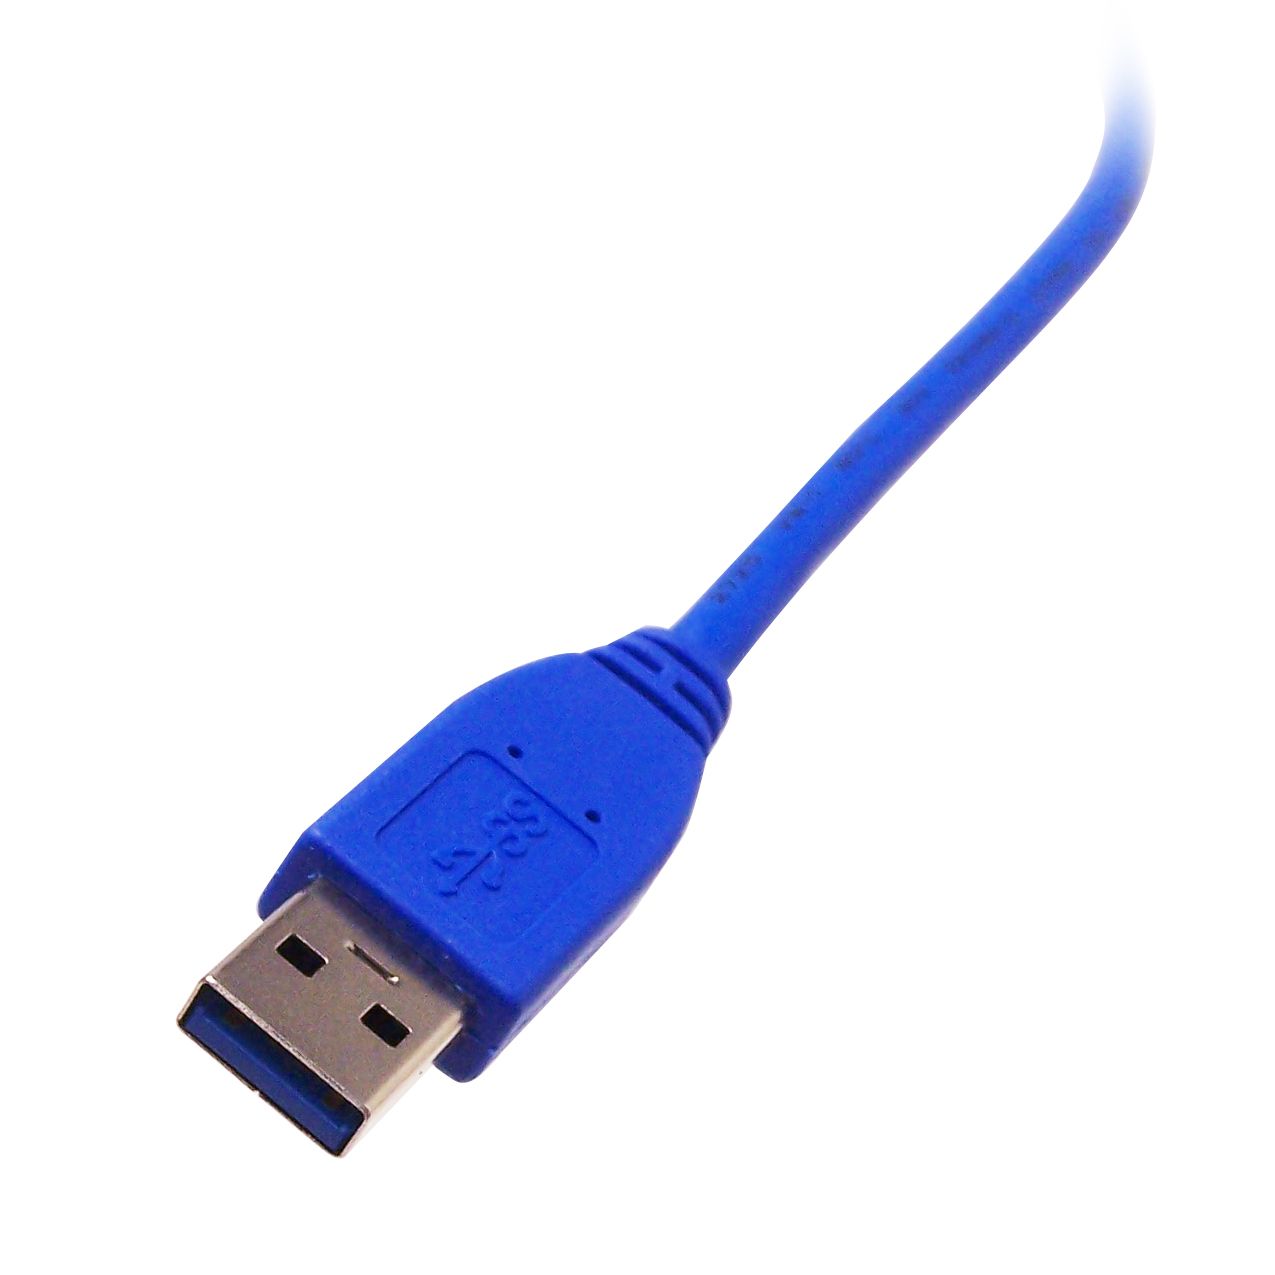 Cables Up & Down & Left & Right Angled 90 Degree USB Micro USB Male to USB Male Data Charge Connector for Tablet 5ft Cable Cable Length: 50cm, Color: Down Andled 